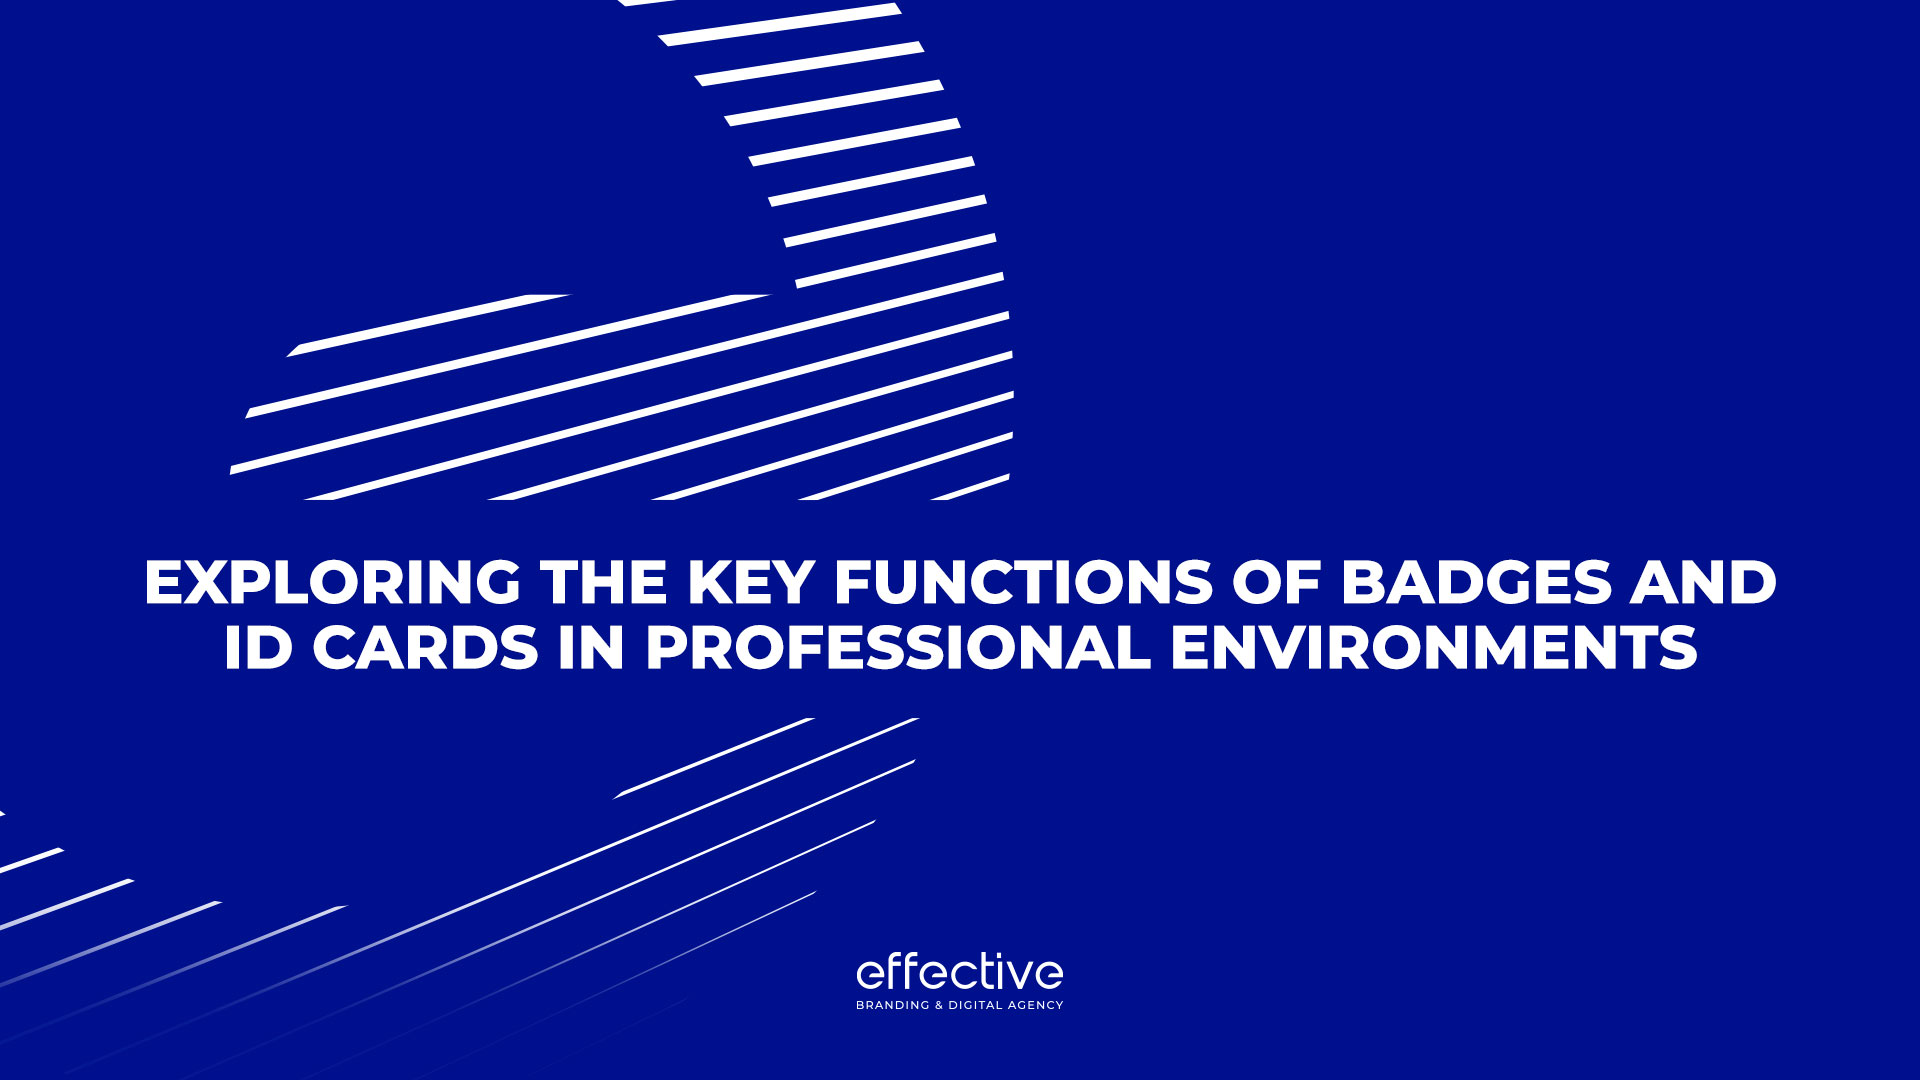 Exploring the Key Functions of Badges and ID Cards in Professional Environments